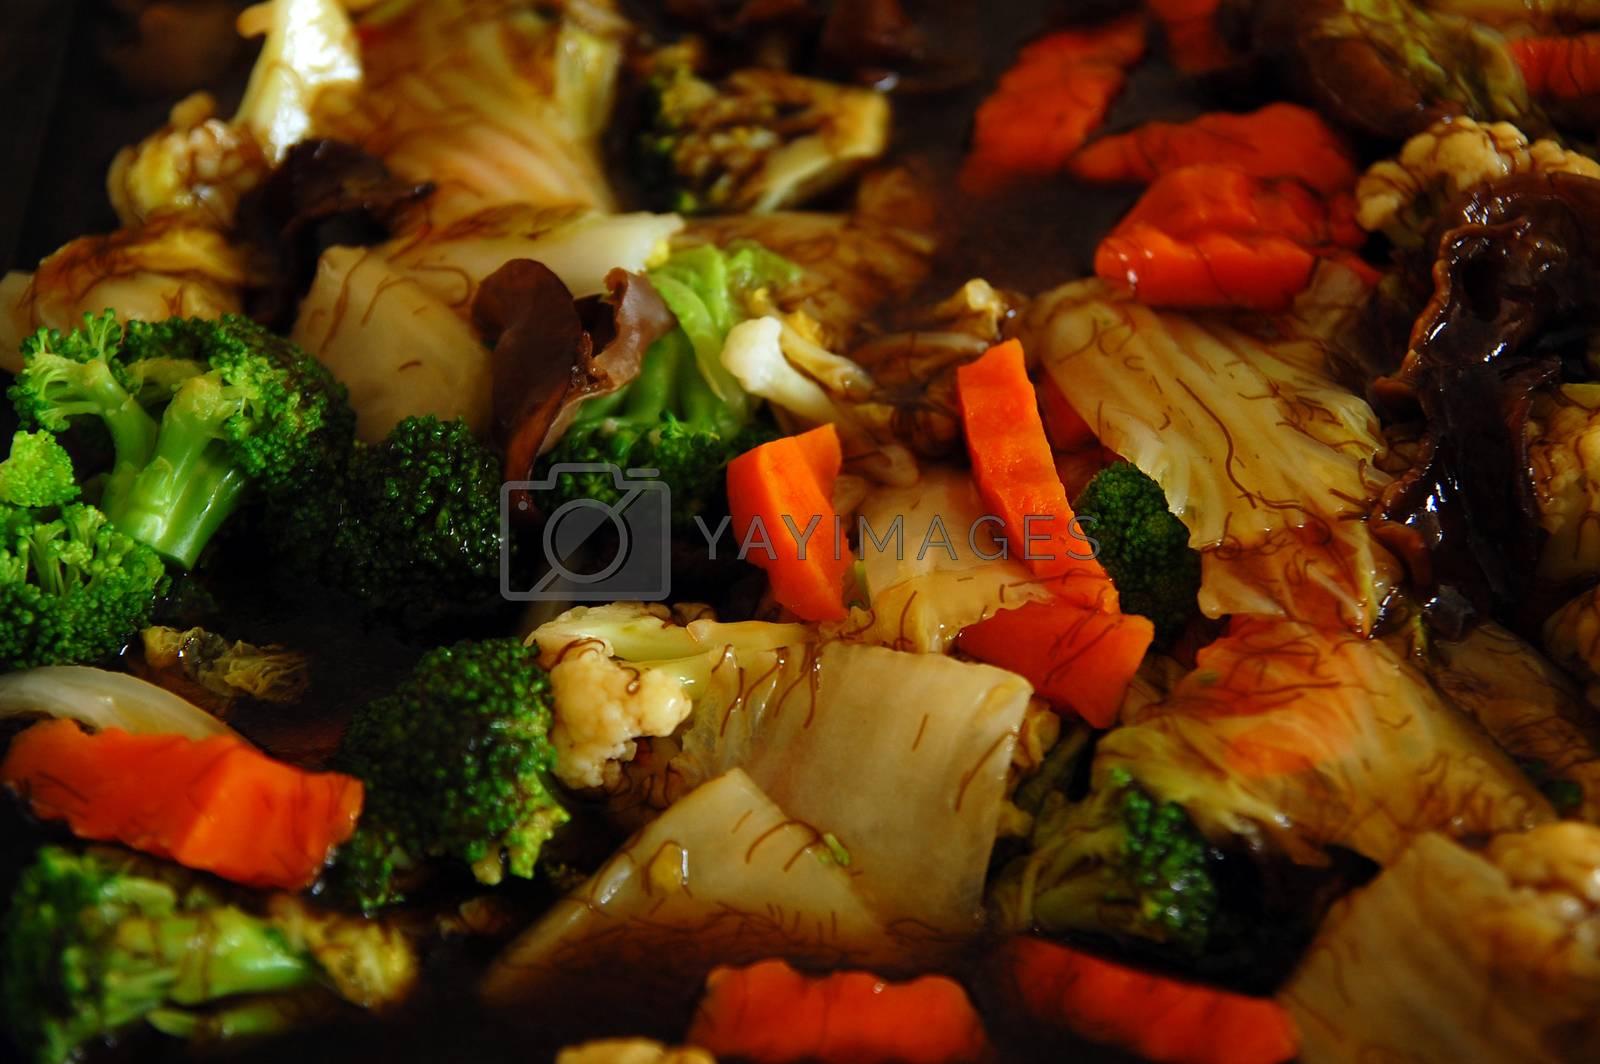 Royalty free image of Mixed vegetables with brocolli, carrots, cabbage, mushroom and f by imwaltersy